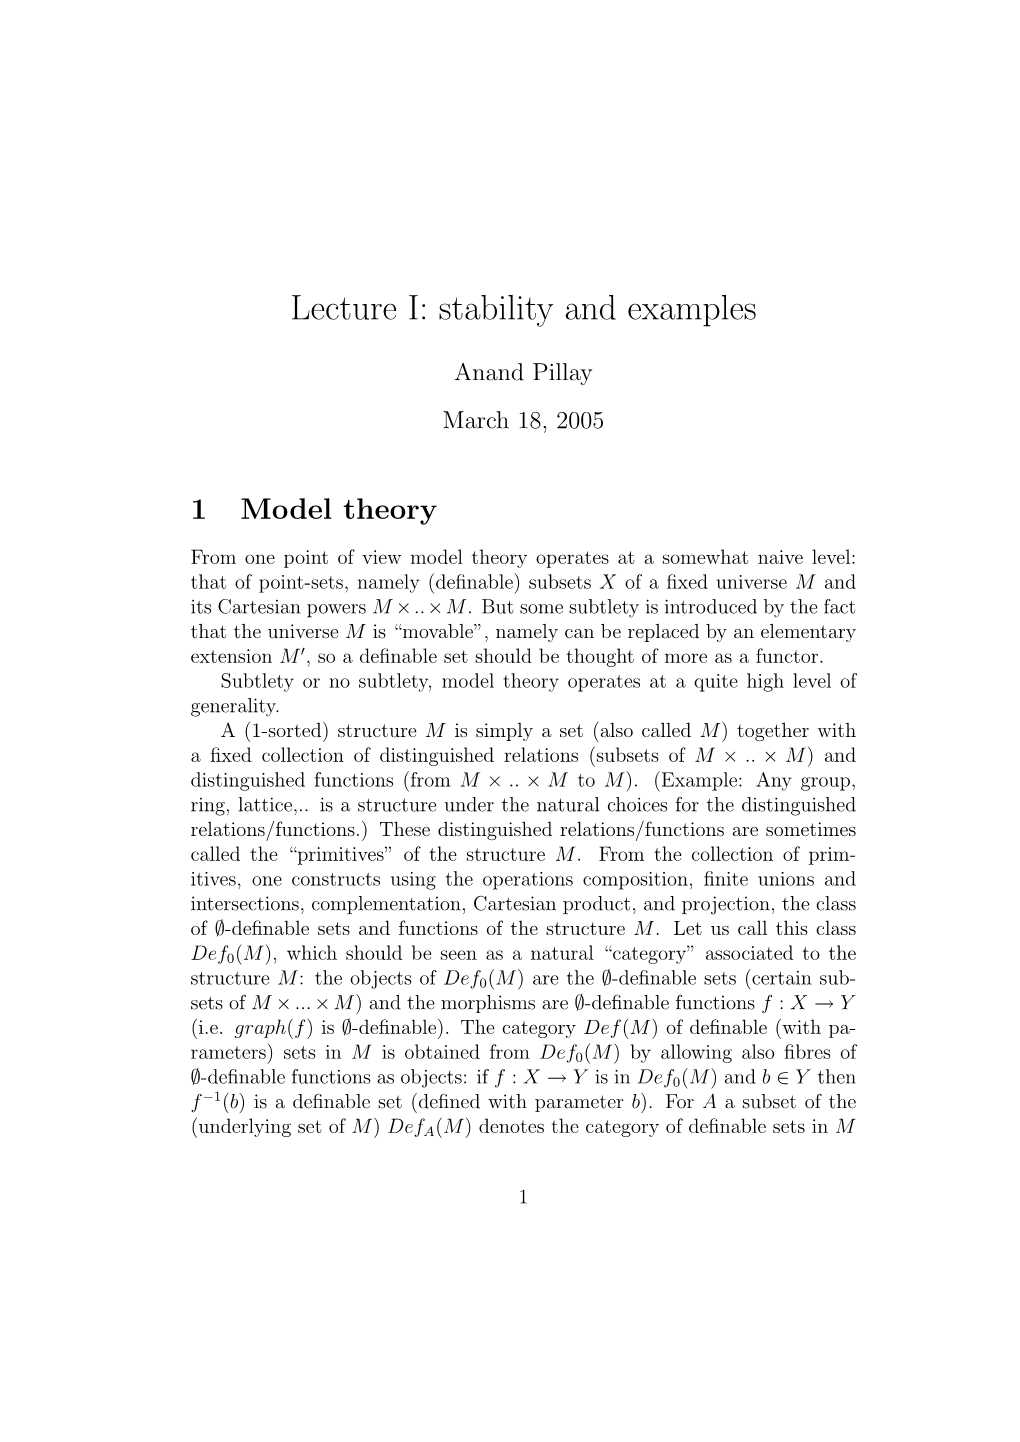 Lecture I: Stability and Examples